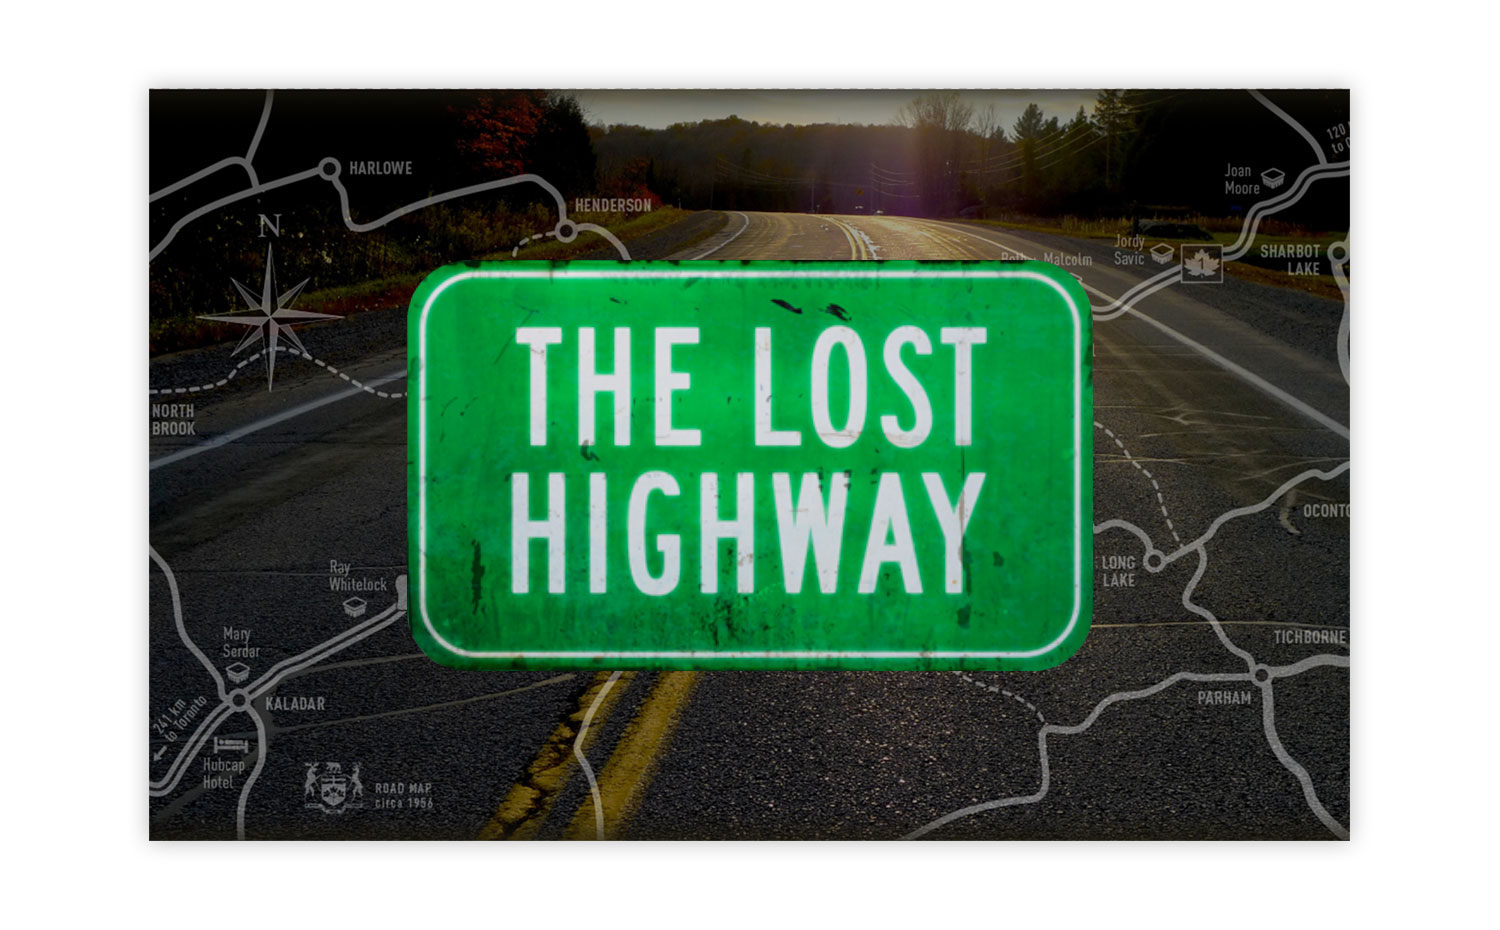 The Lost Highway logo